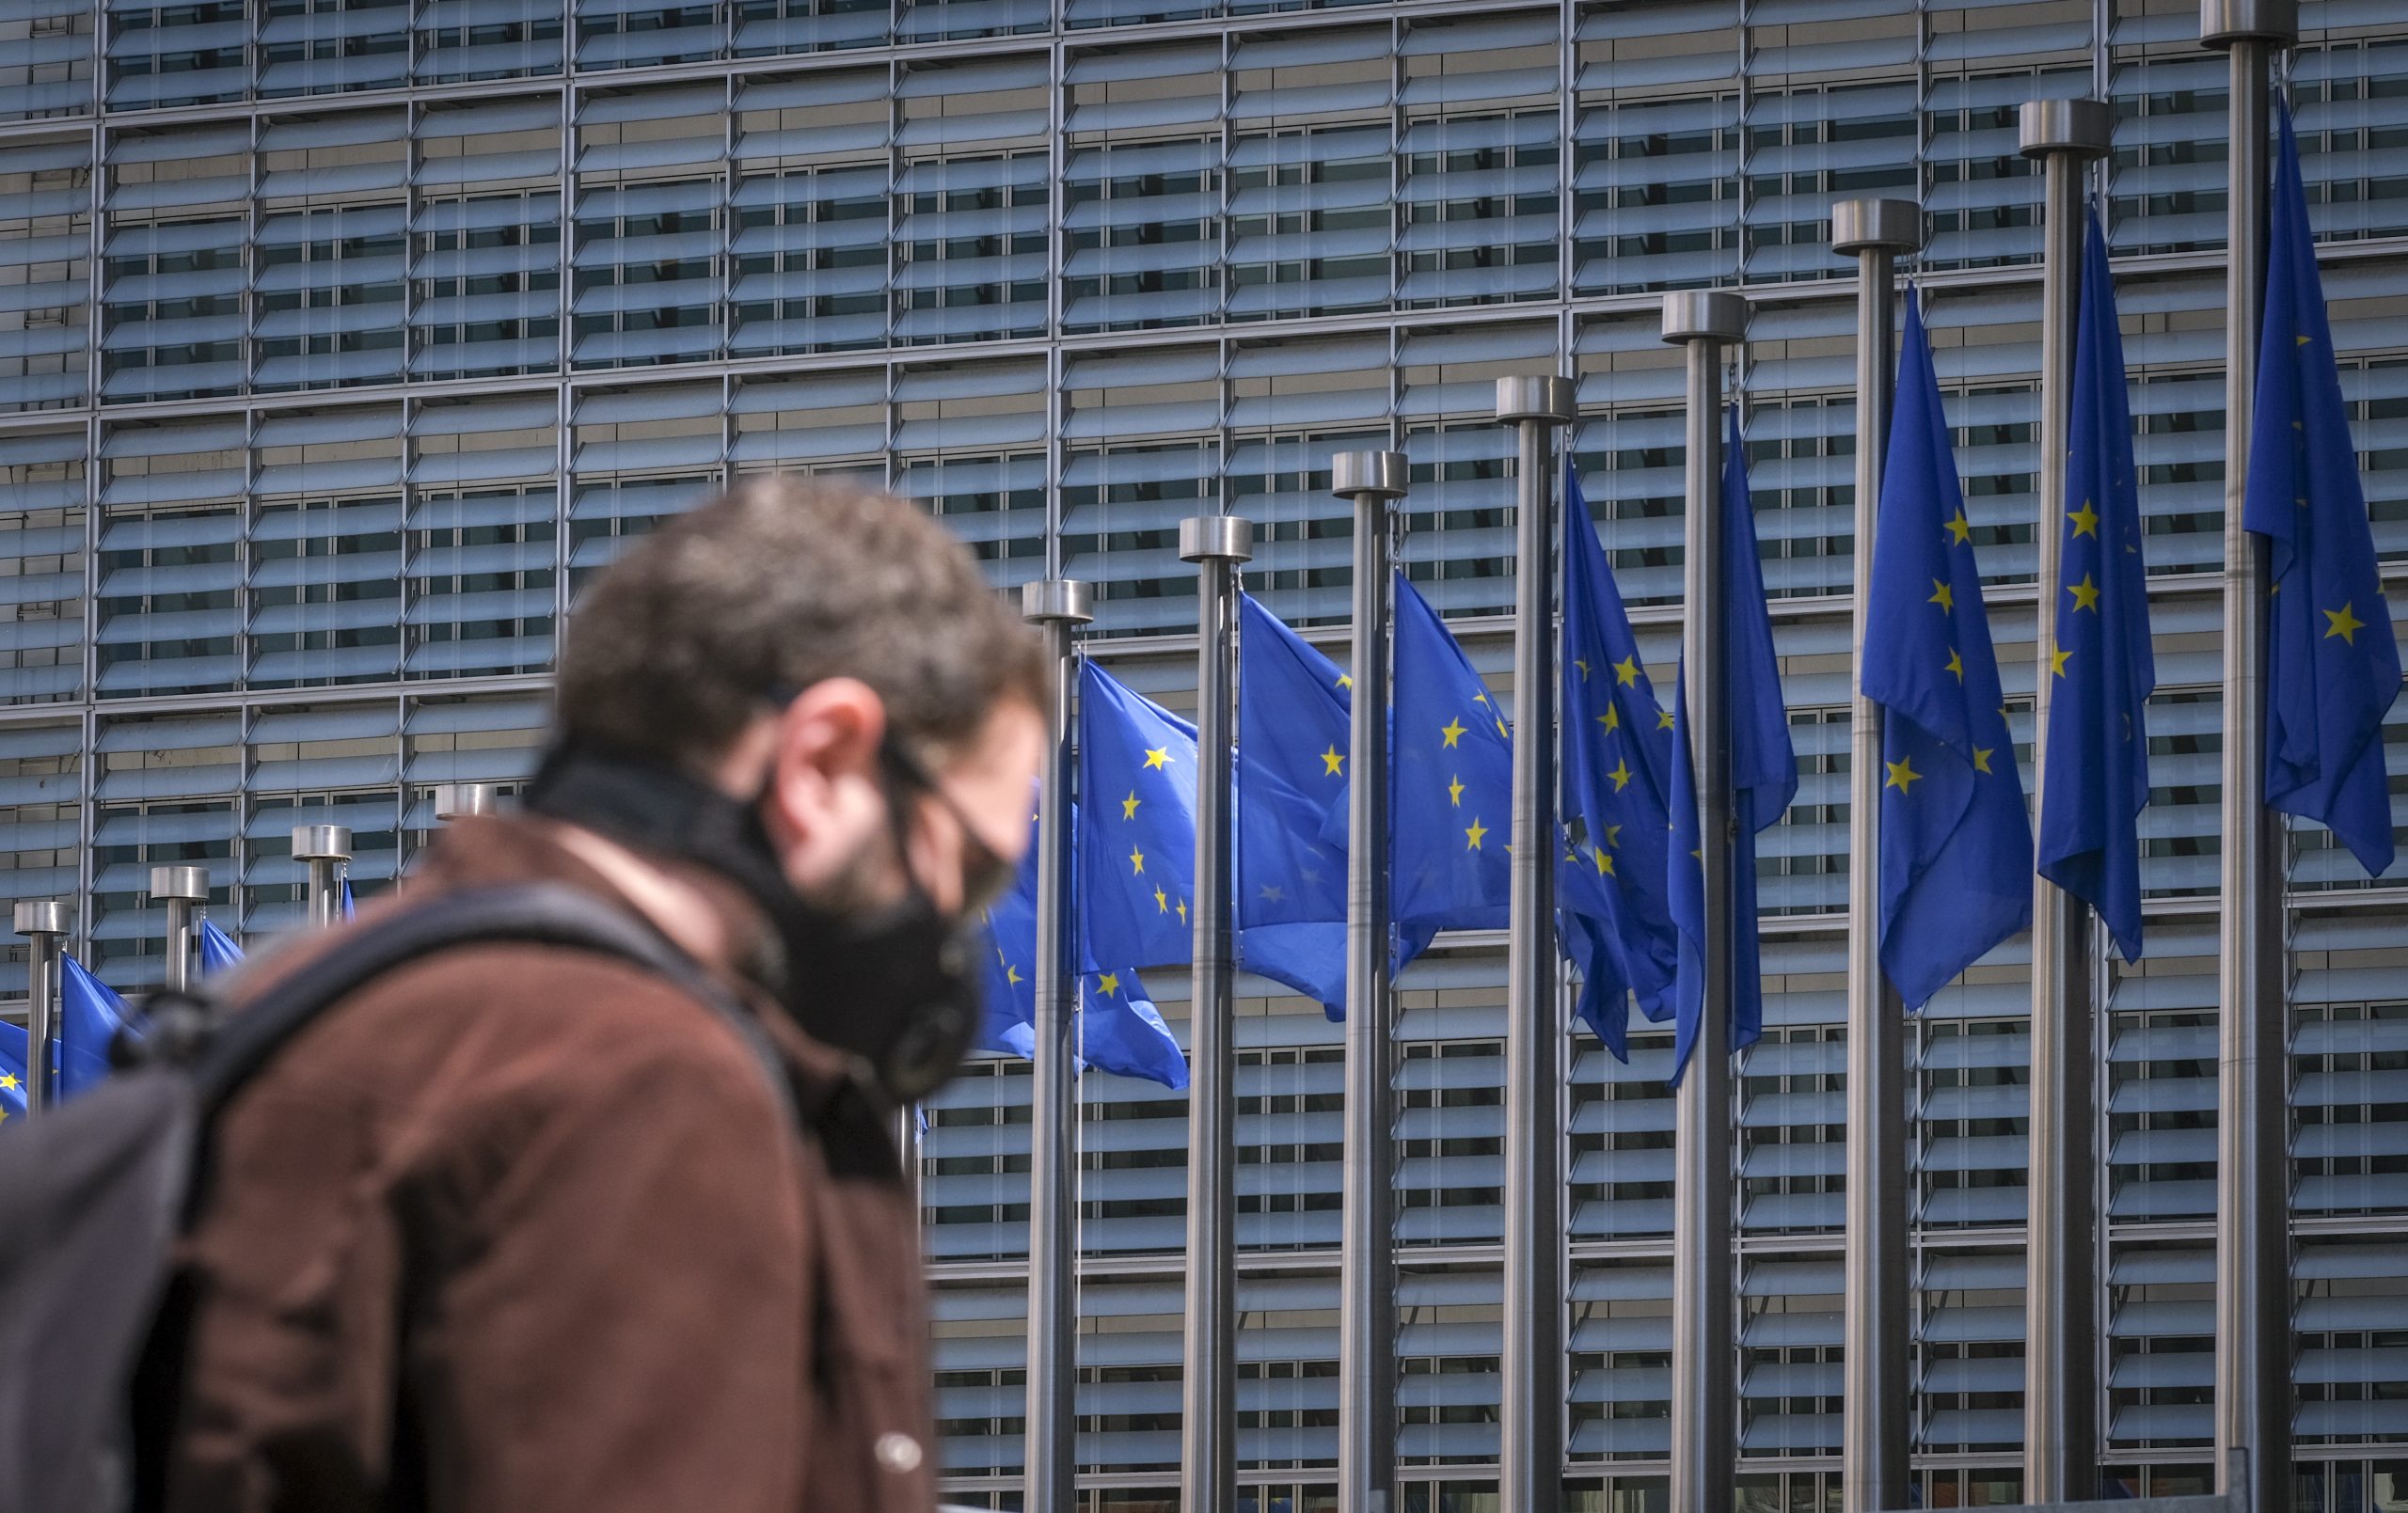 epa08443018 A man wearing a face mask walks in front of the European Commission flags at the Berlaymont building headquarters in Brussels, Belgium, 25 May 2020. Countries around the world are gradually easing COVID-19 lockdown restrictions in an effort to restart the economy and help people in their daily routines.  EPA/OLIVIER HOSLET